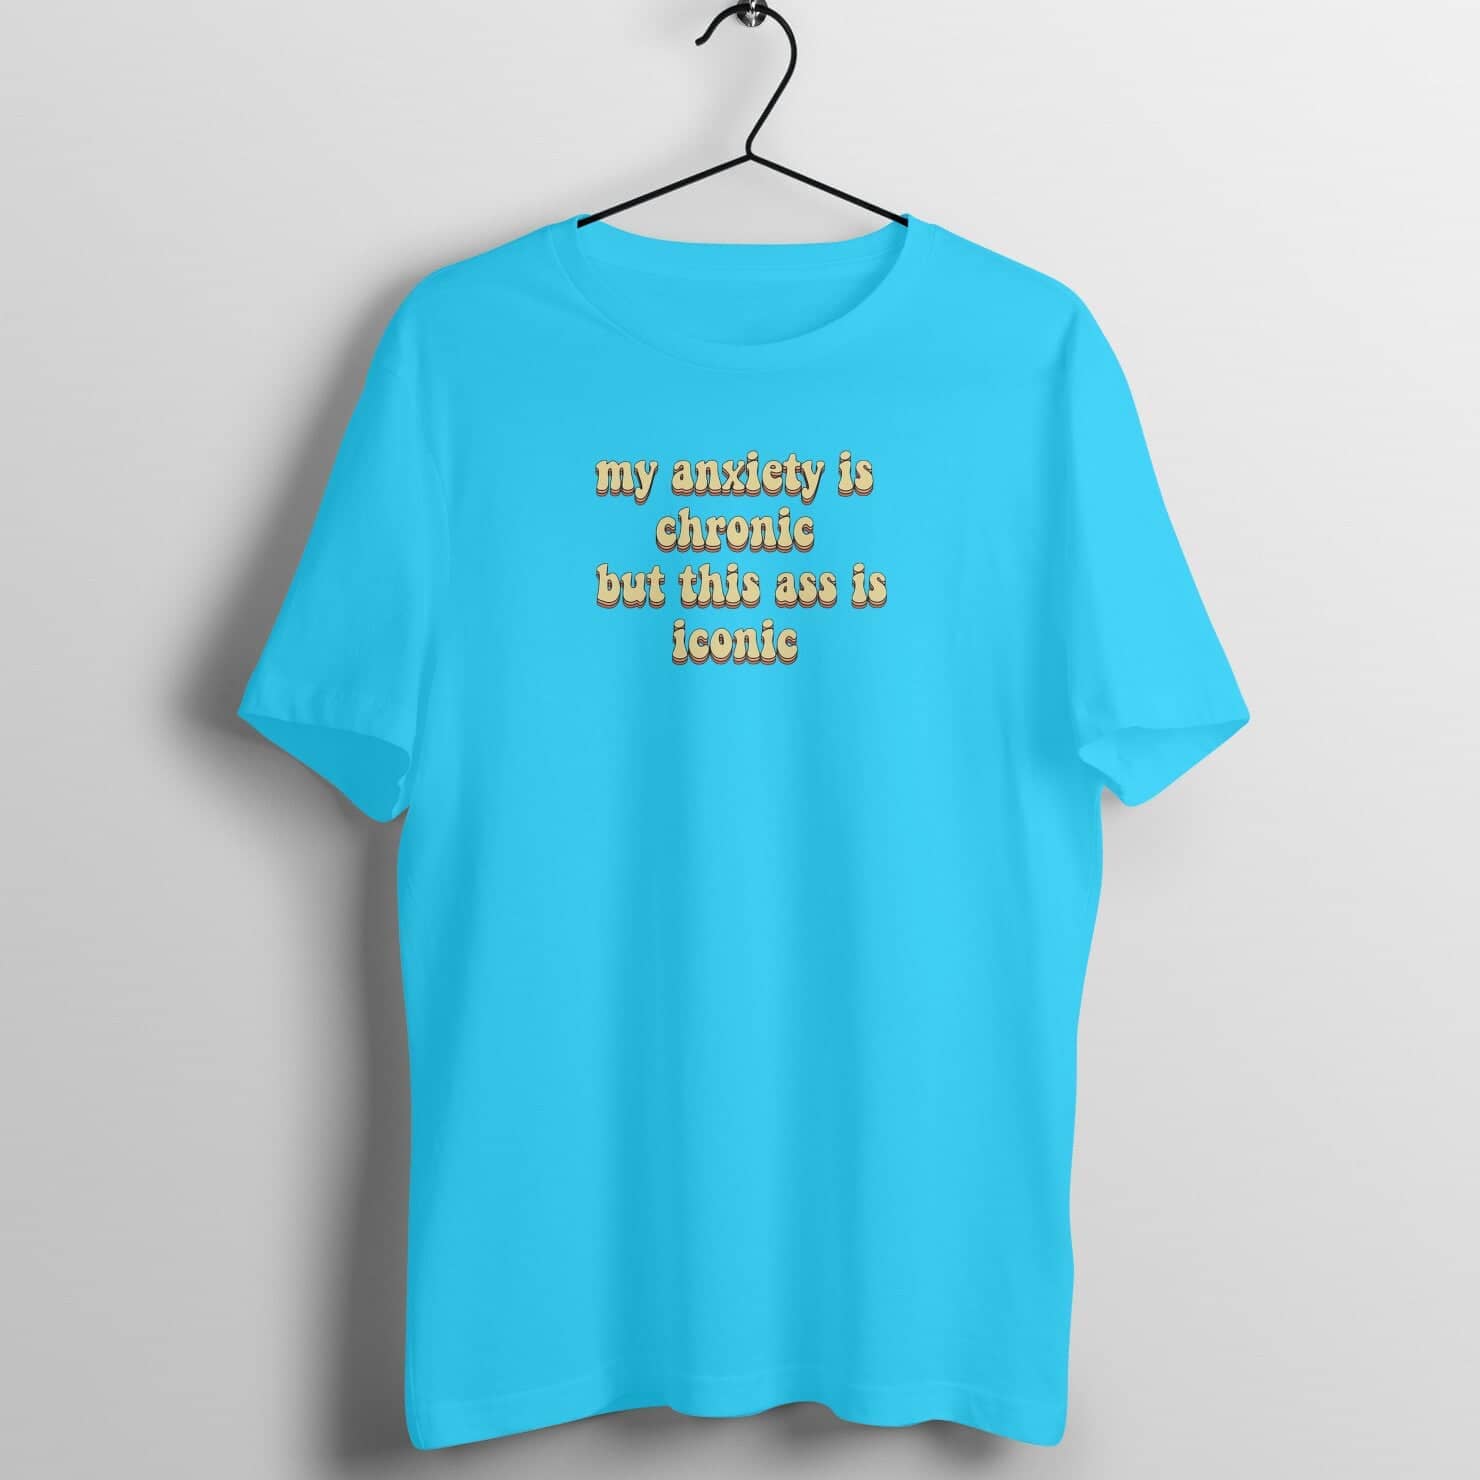 My Anxiety is Chronic But This Ass is Iconic Funny T Shirt for Women freeshipping - Catch My Drift India